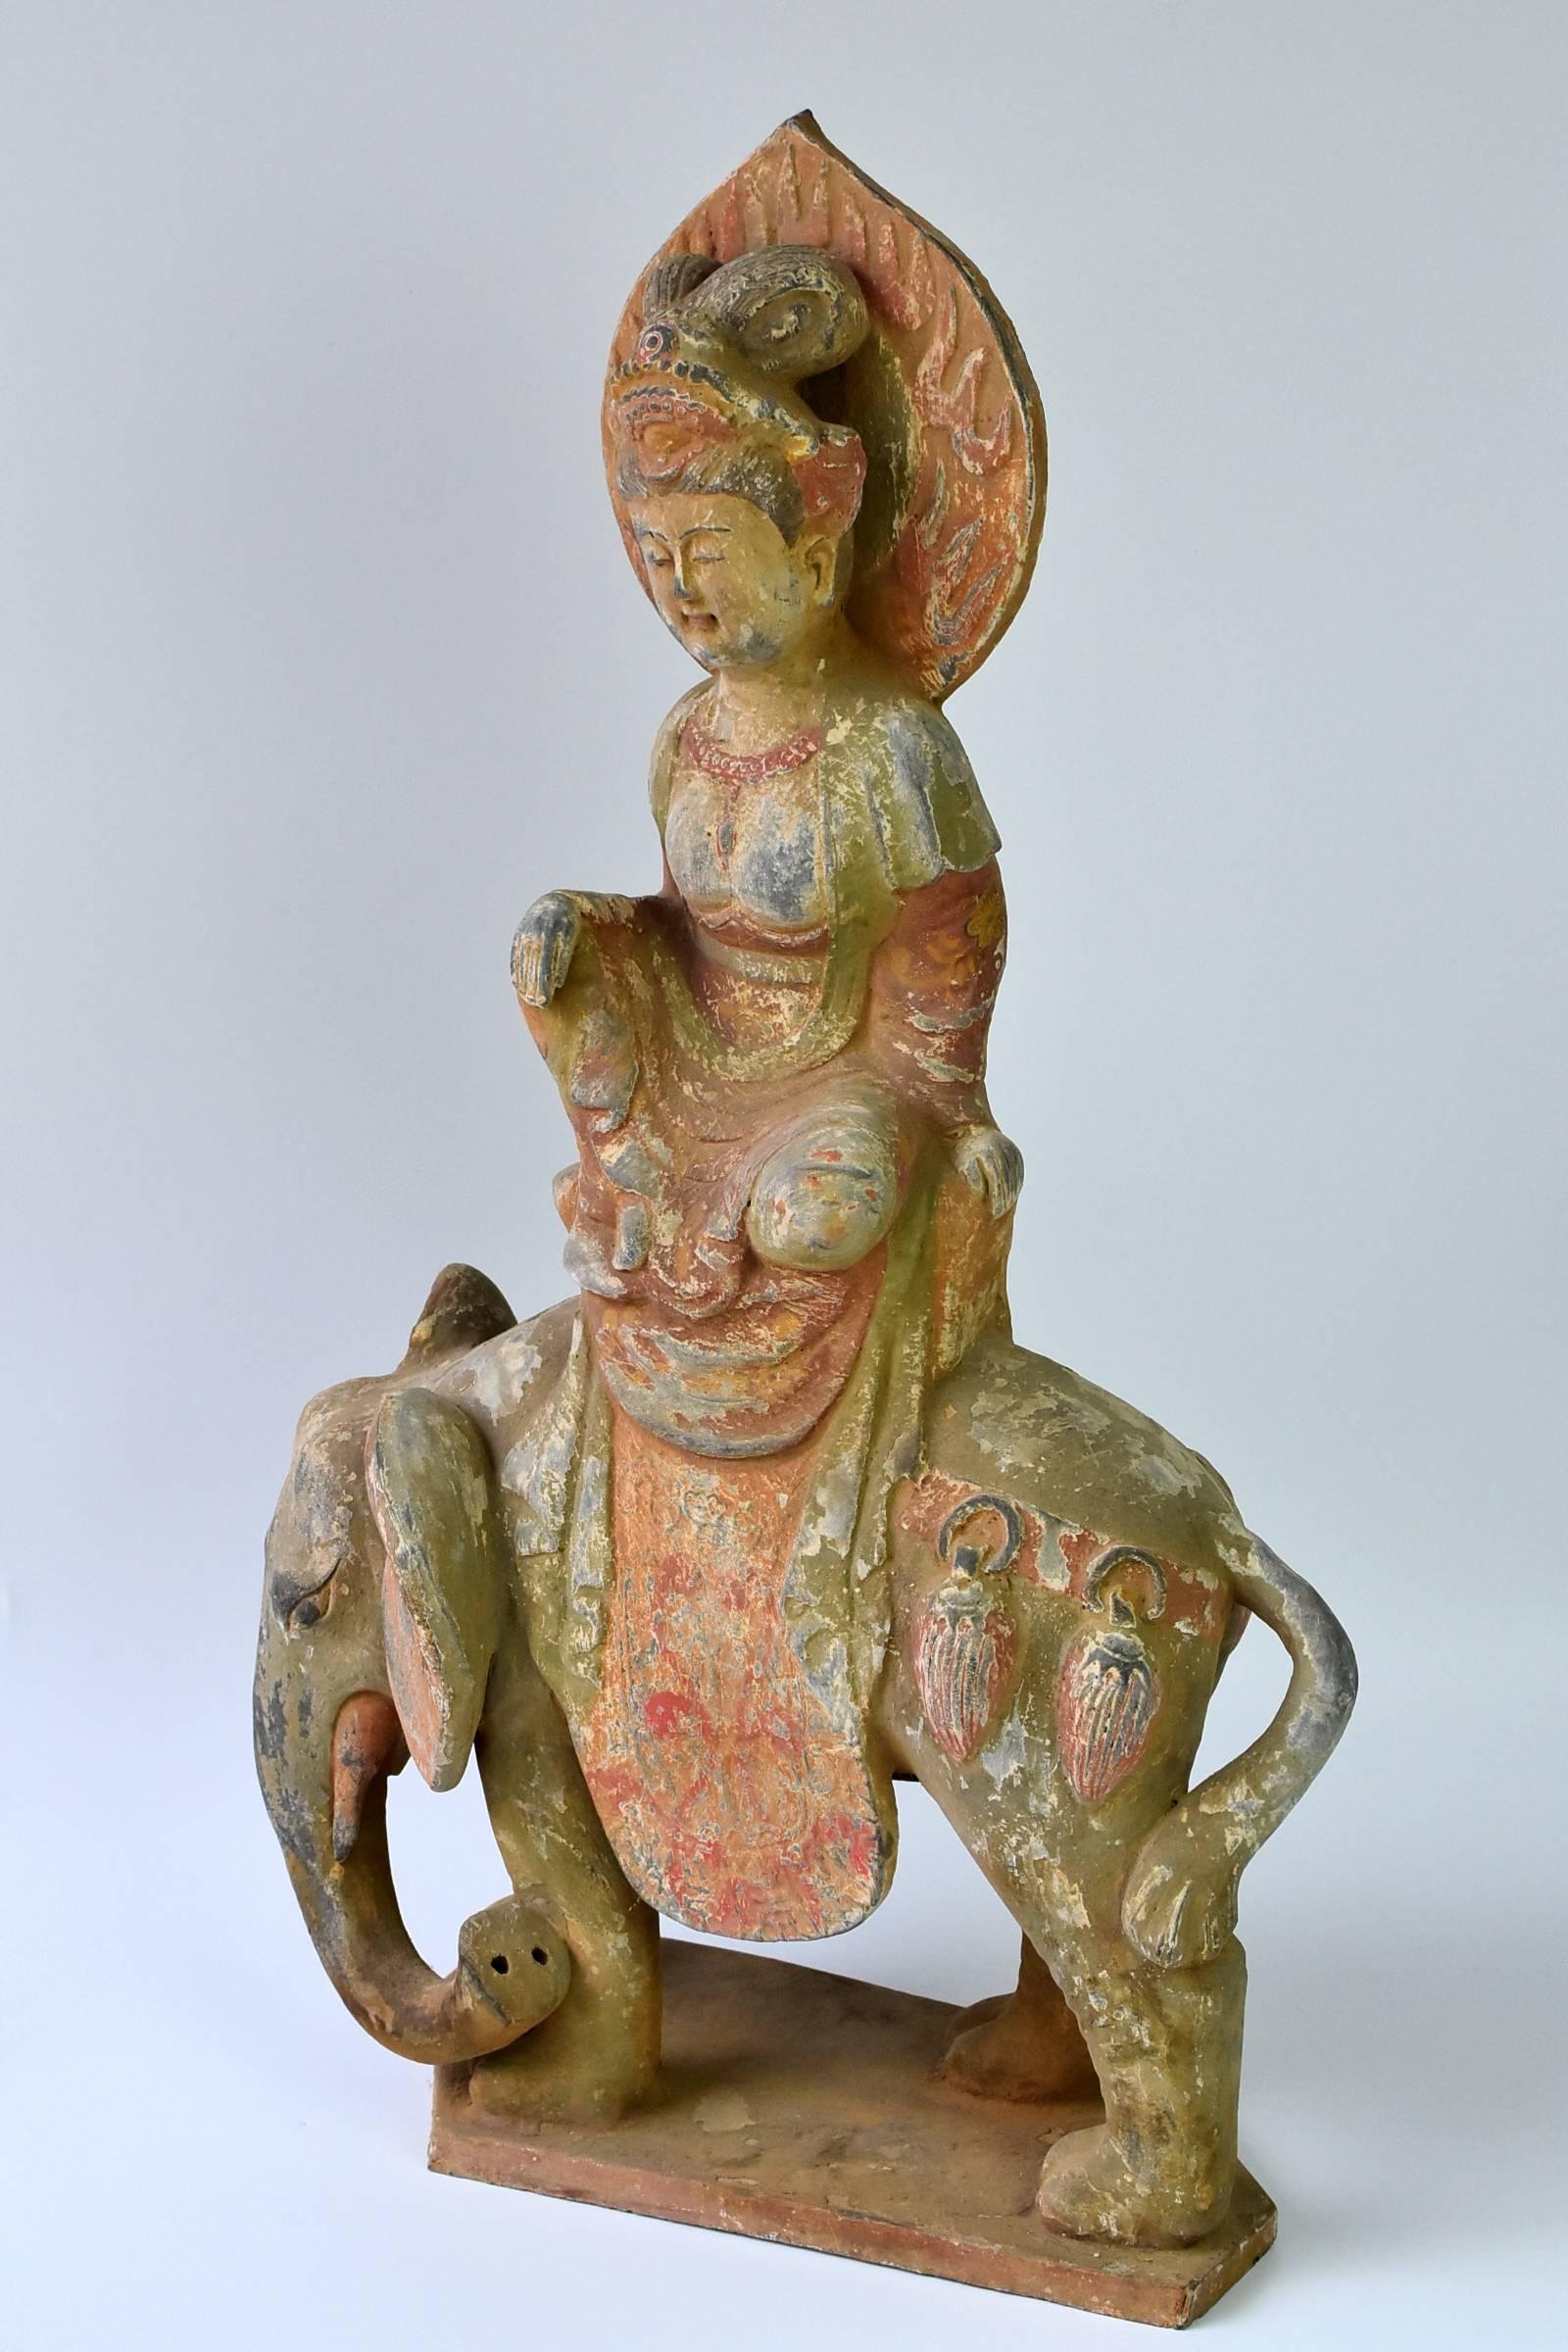 A fantastic terracotta piece featuring Bodhisattva Pu Xian on her elephant ride. Pu Xian, Samantabhadra, one of the four great Bodhisattva, is The Bodhisattva of Great Conduct, with the particular quality representing cultivation and practice using